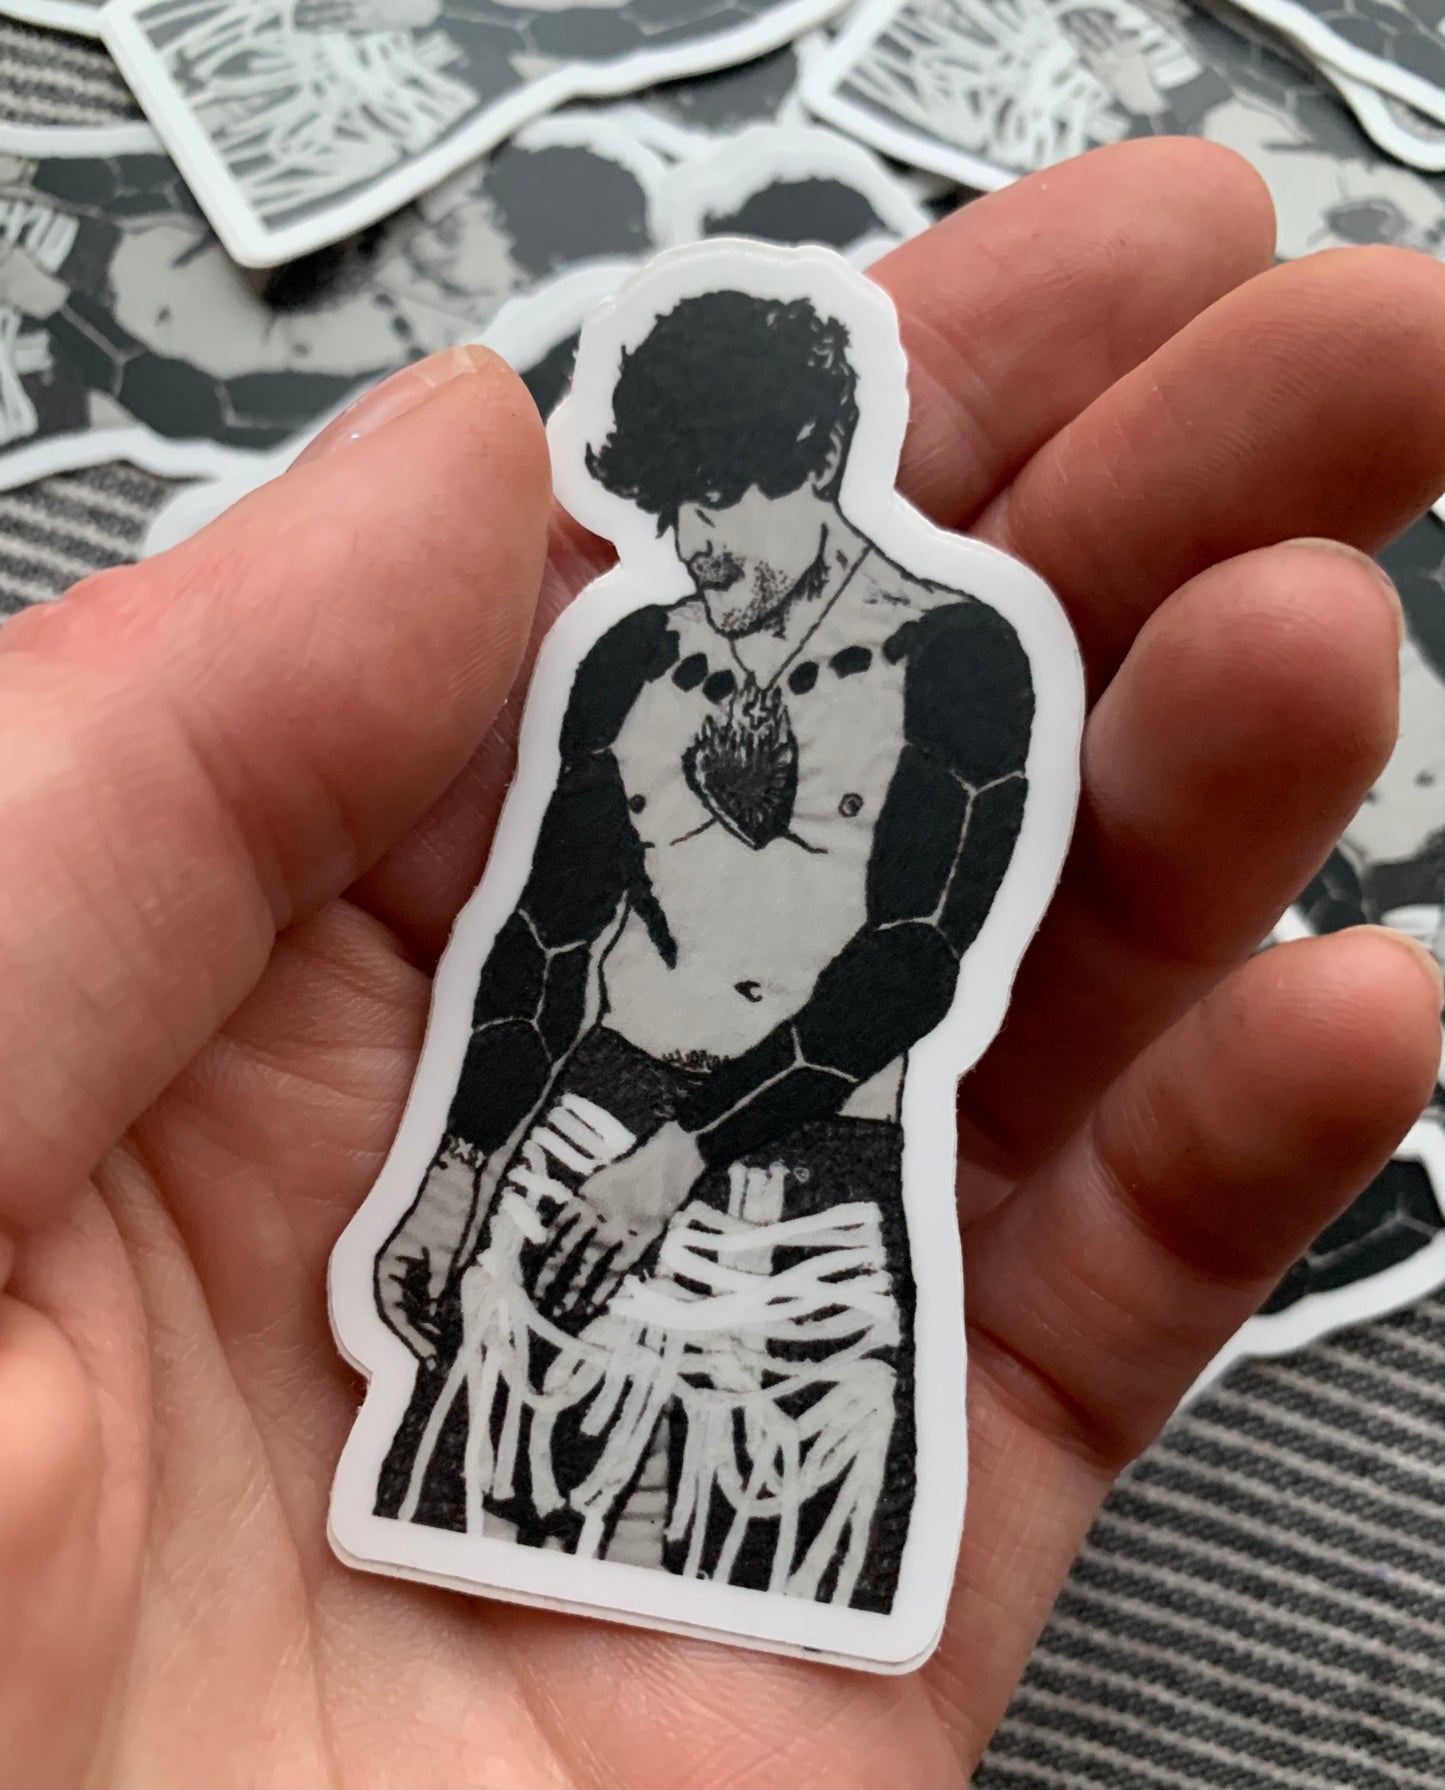 Davey Havok, my muse, in sticker form. He is wearing RIck Owens, and he even reposted this design! 